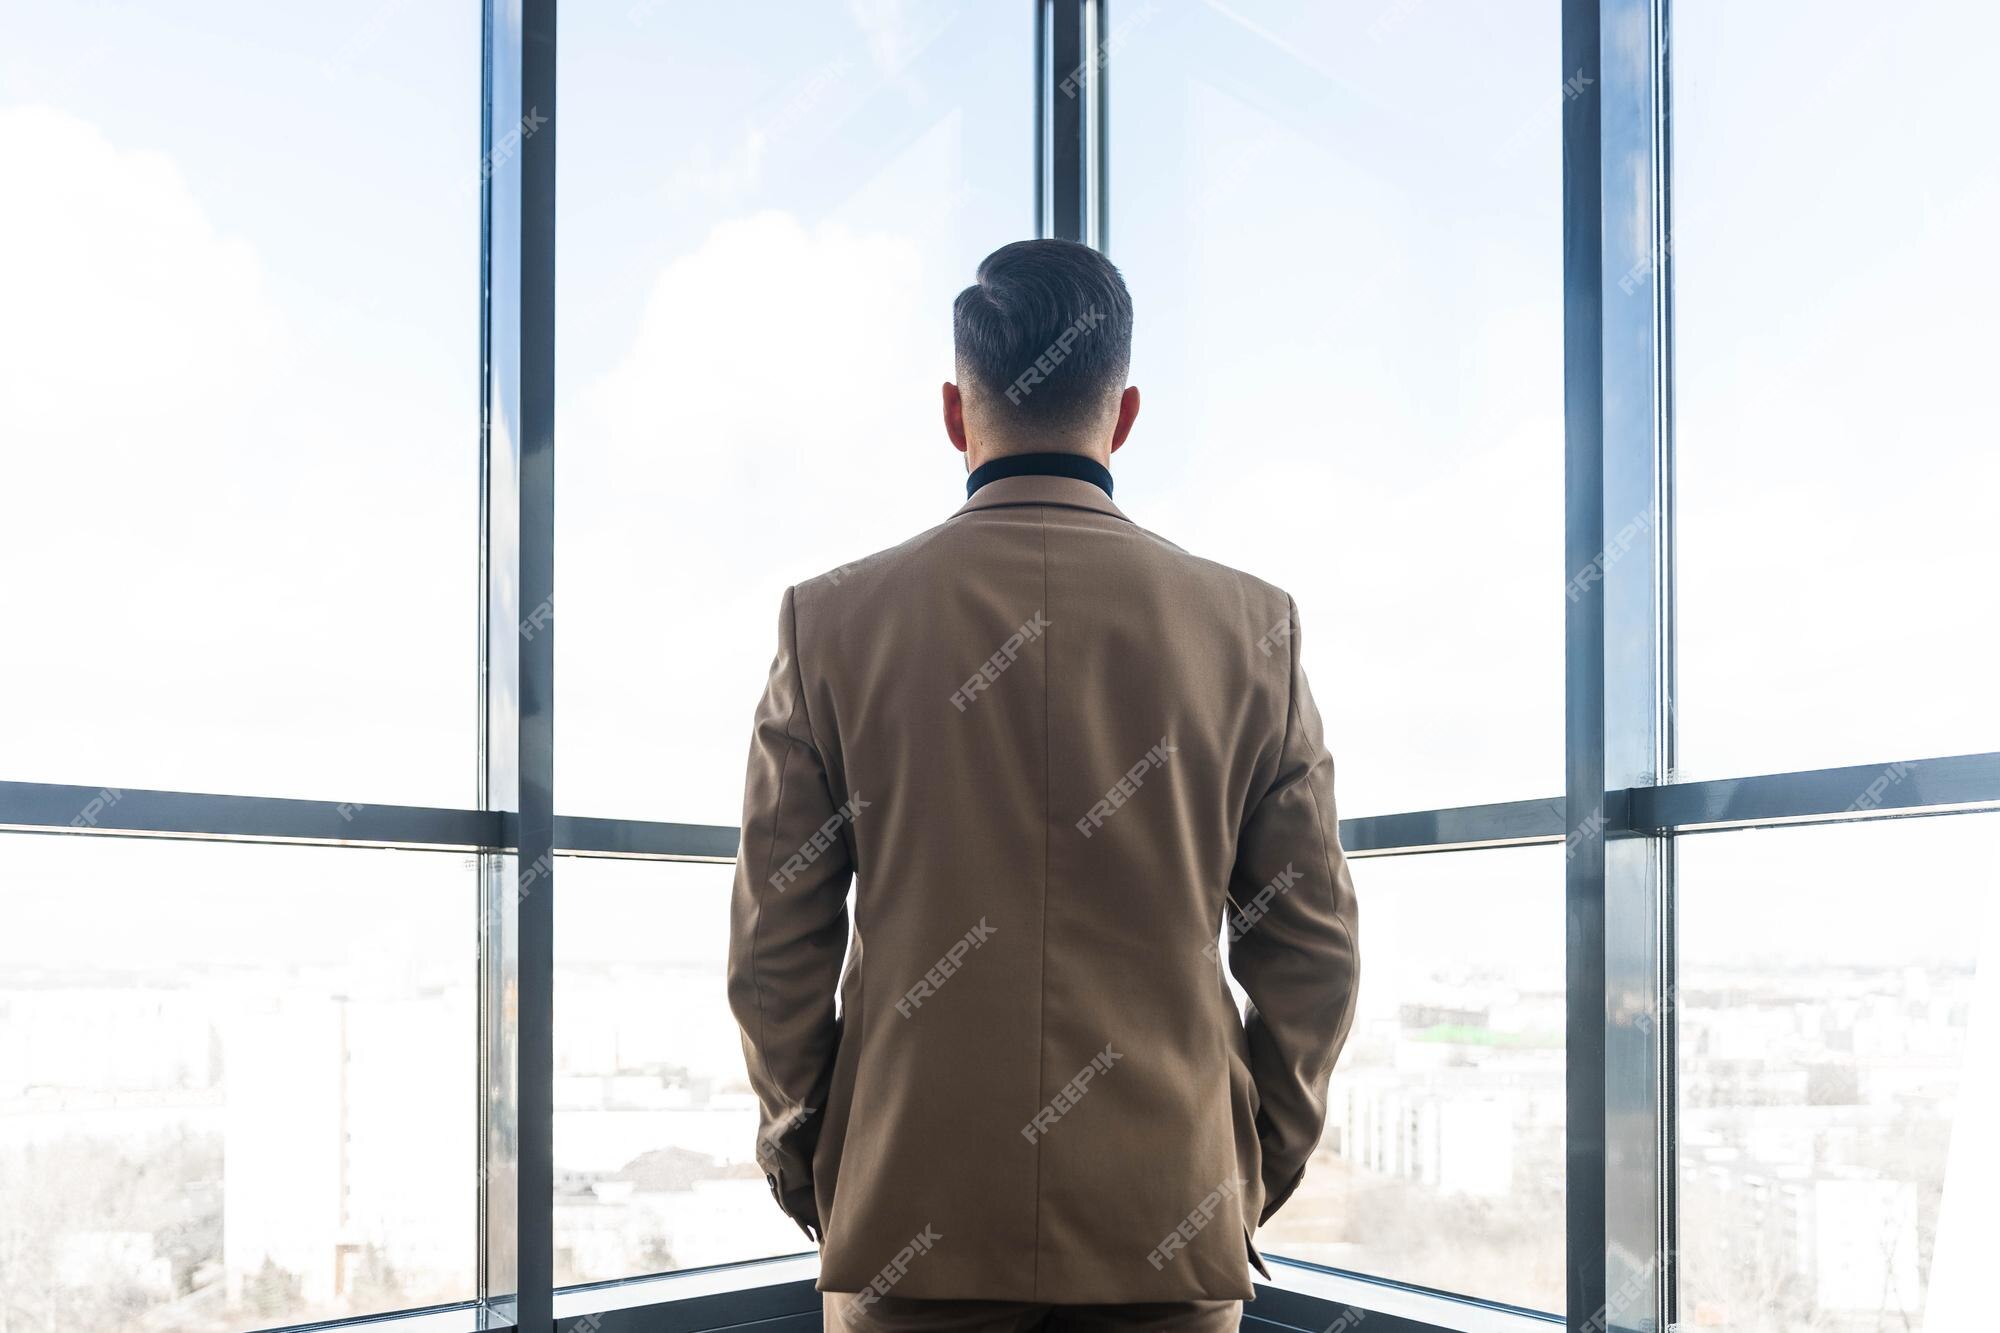 Free Images : thinking, reflection, corporate, professional, black,  interior design, businessman, executive, business man, looking out window,  window covering, human positions 2400x1595 - - 599556 - Free stock photos -  PxHere